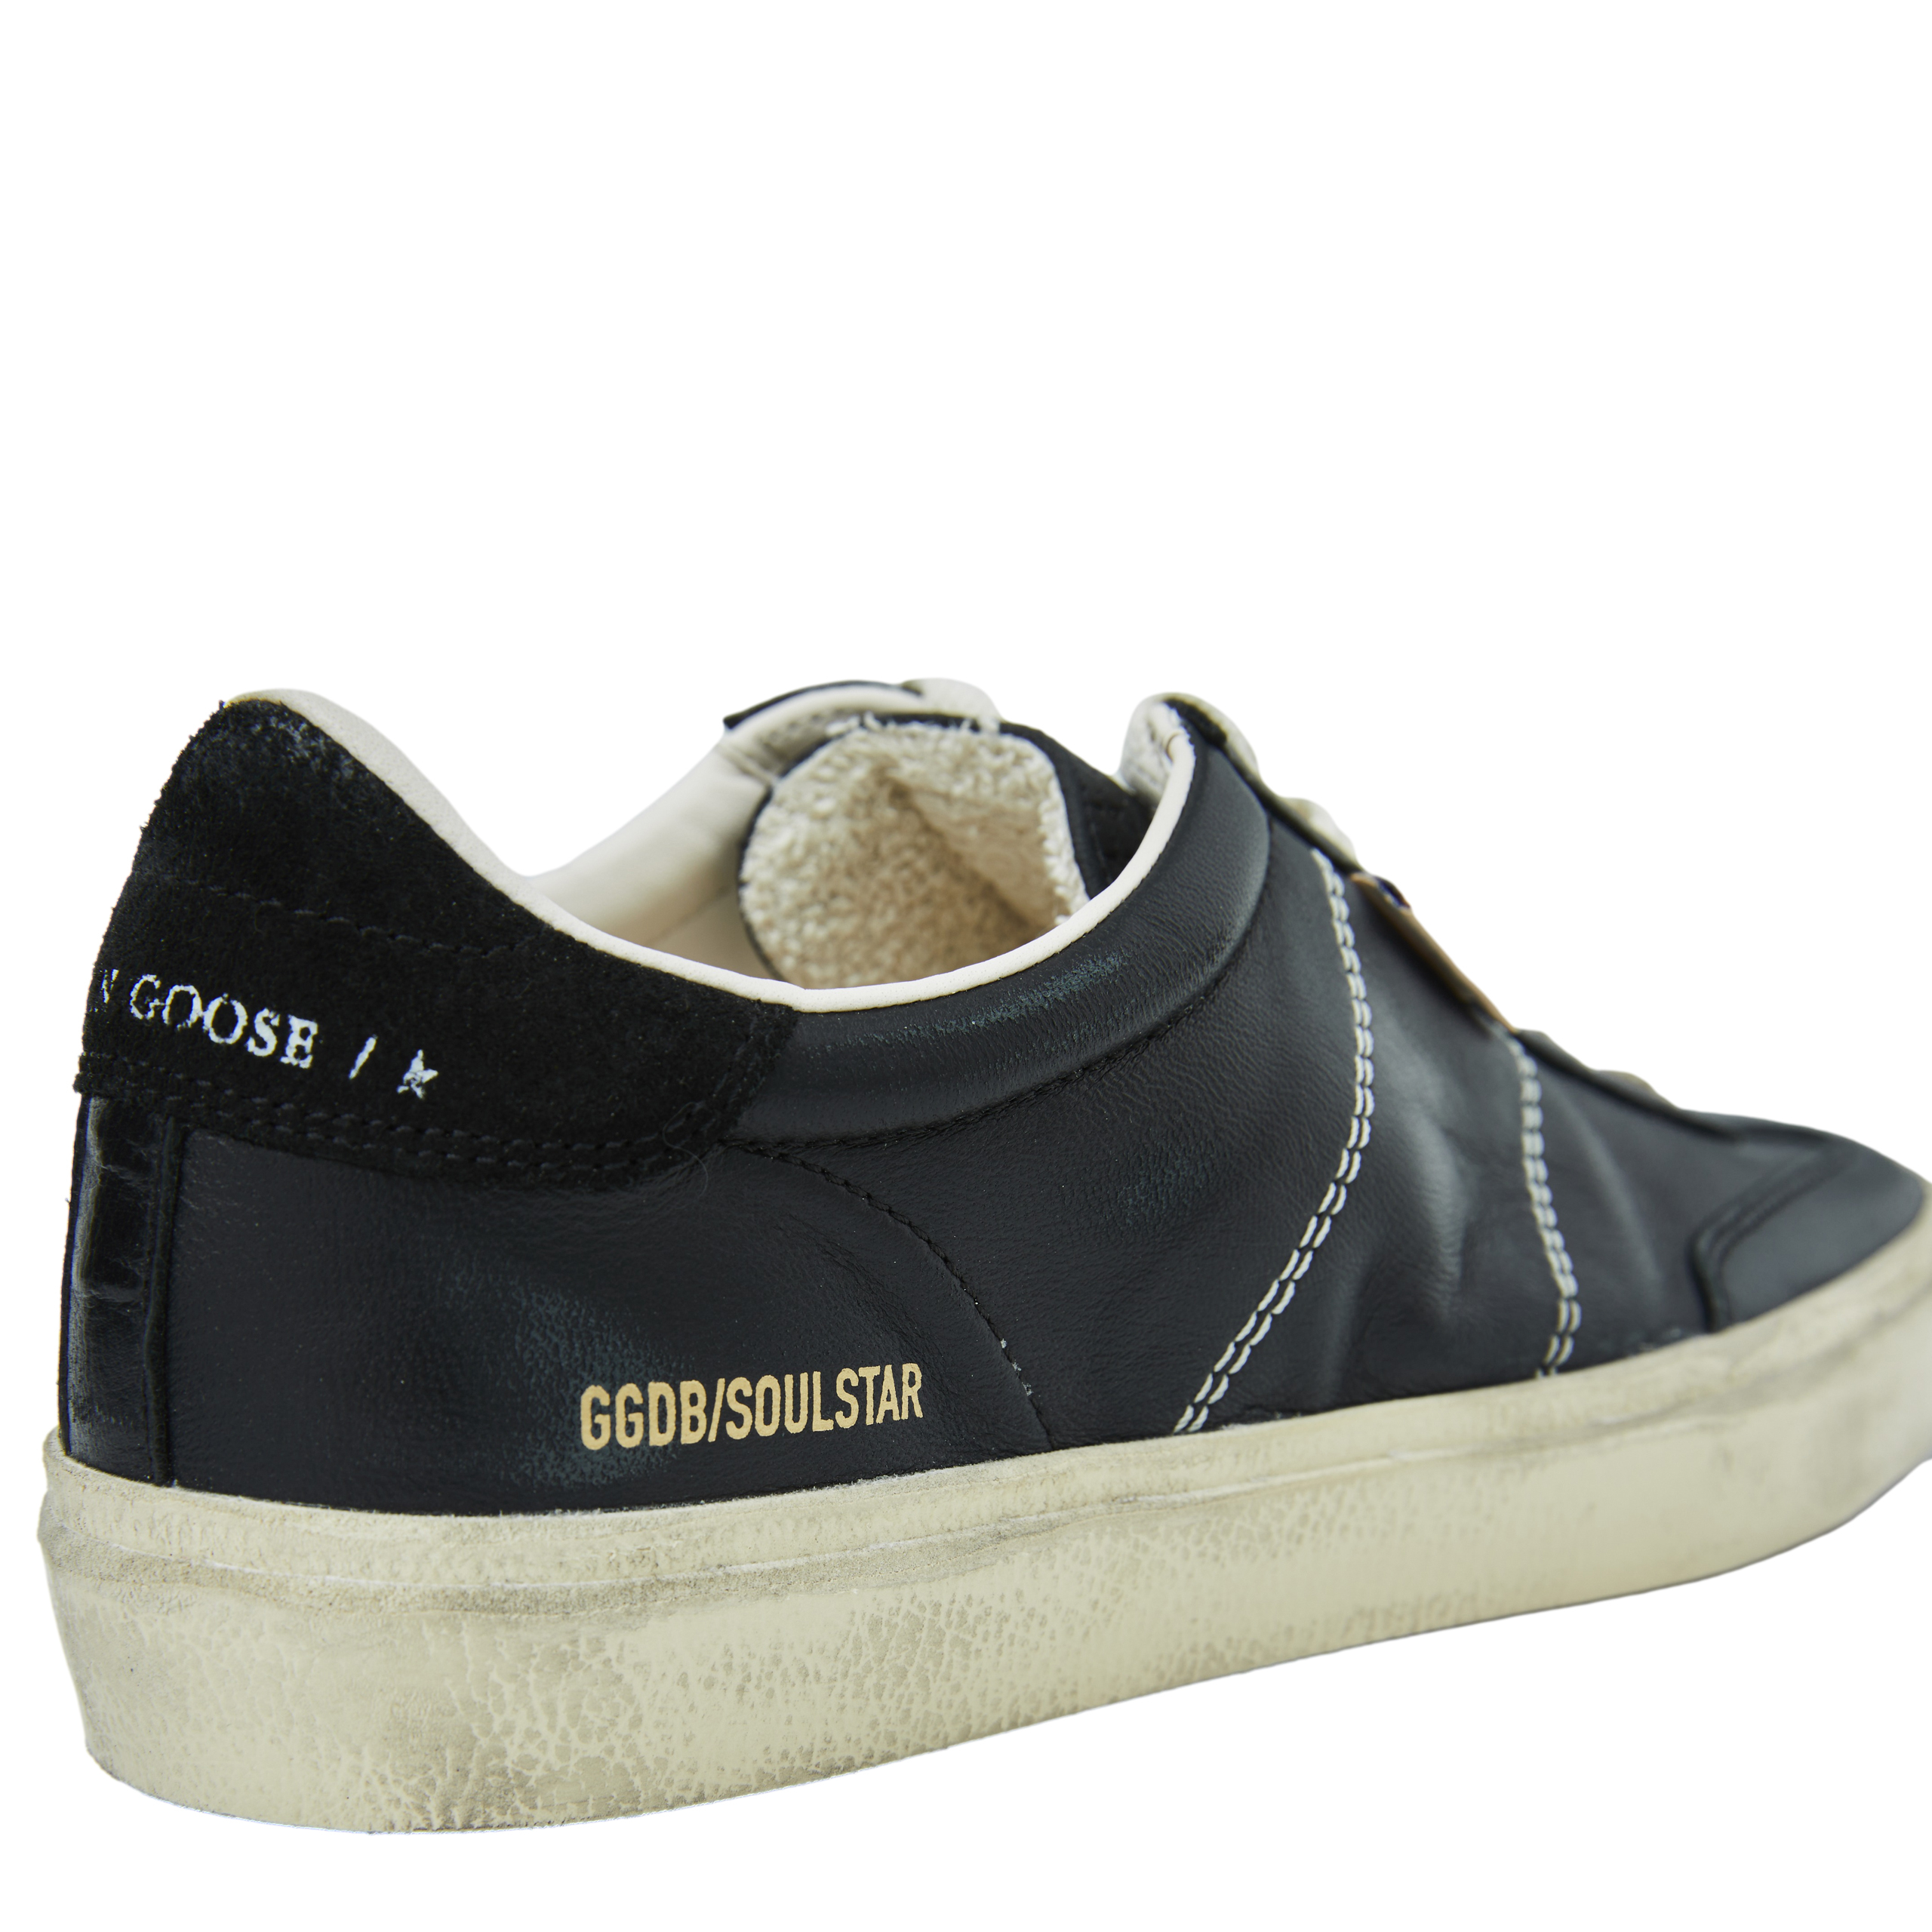 None Golden Goose Deluxe Brand GMF00464/F005050/90100, размер 44;45;46 GMF00464/F005050/90100 - фото 7